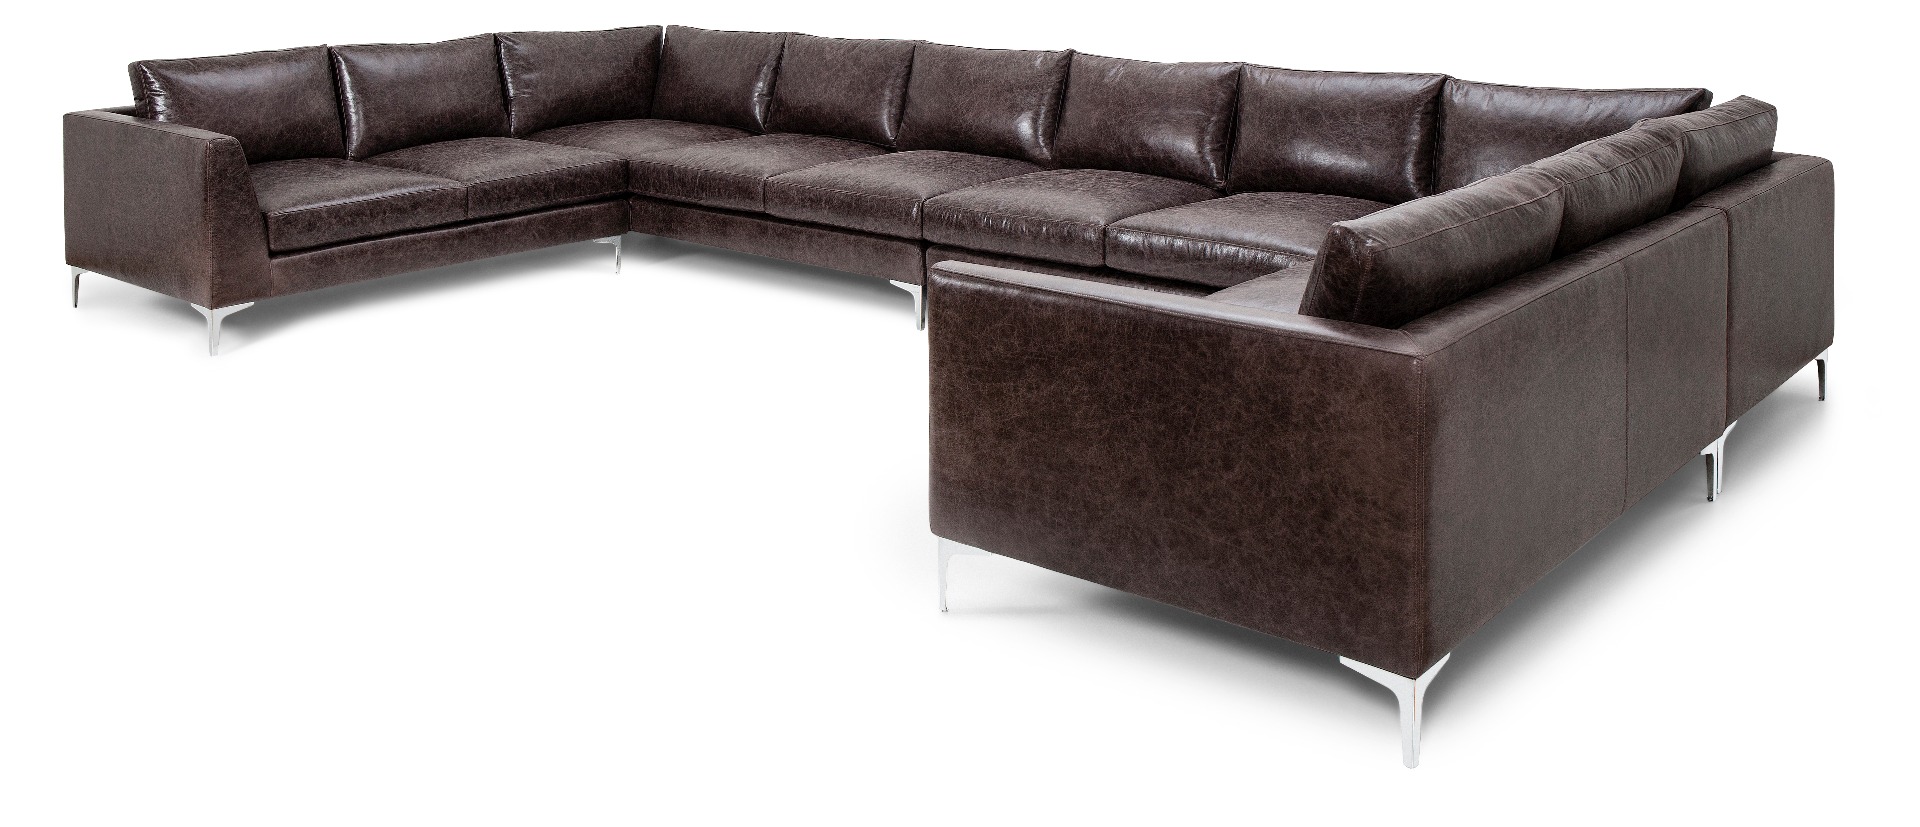 Luxury rich brown Gamand leather corner sofa by Luxuria London